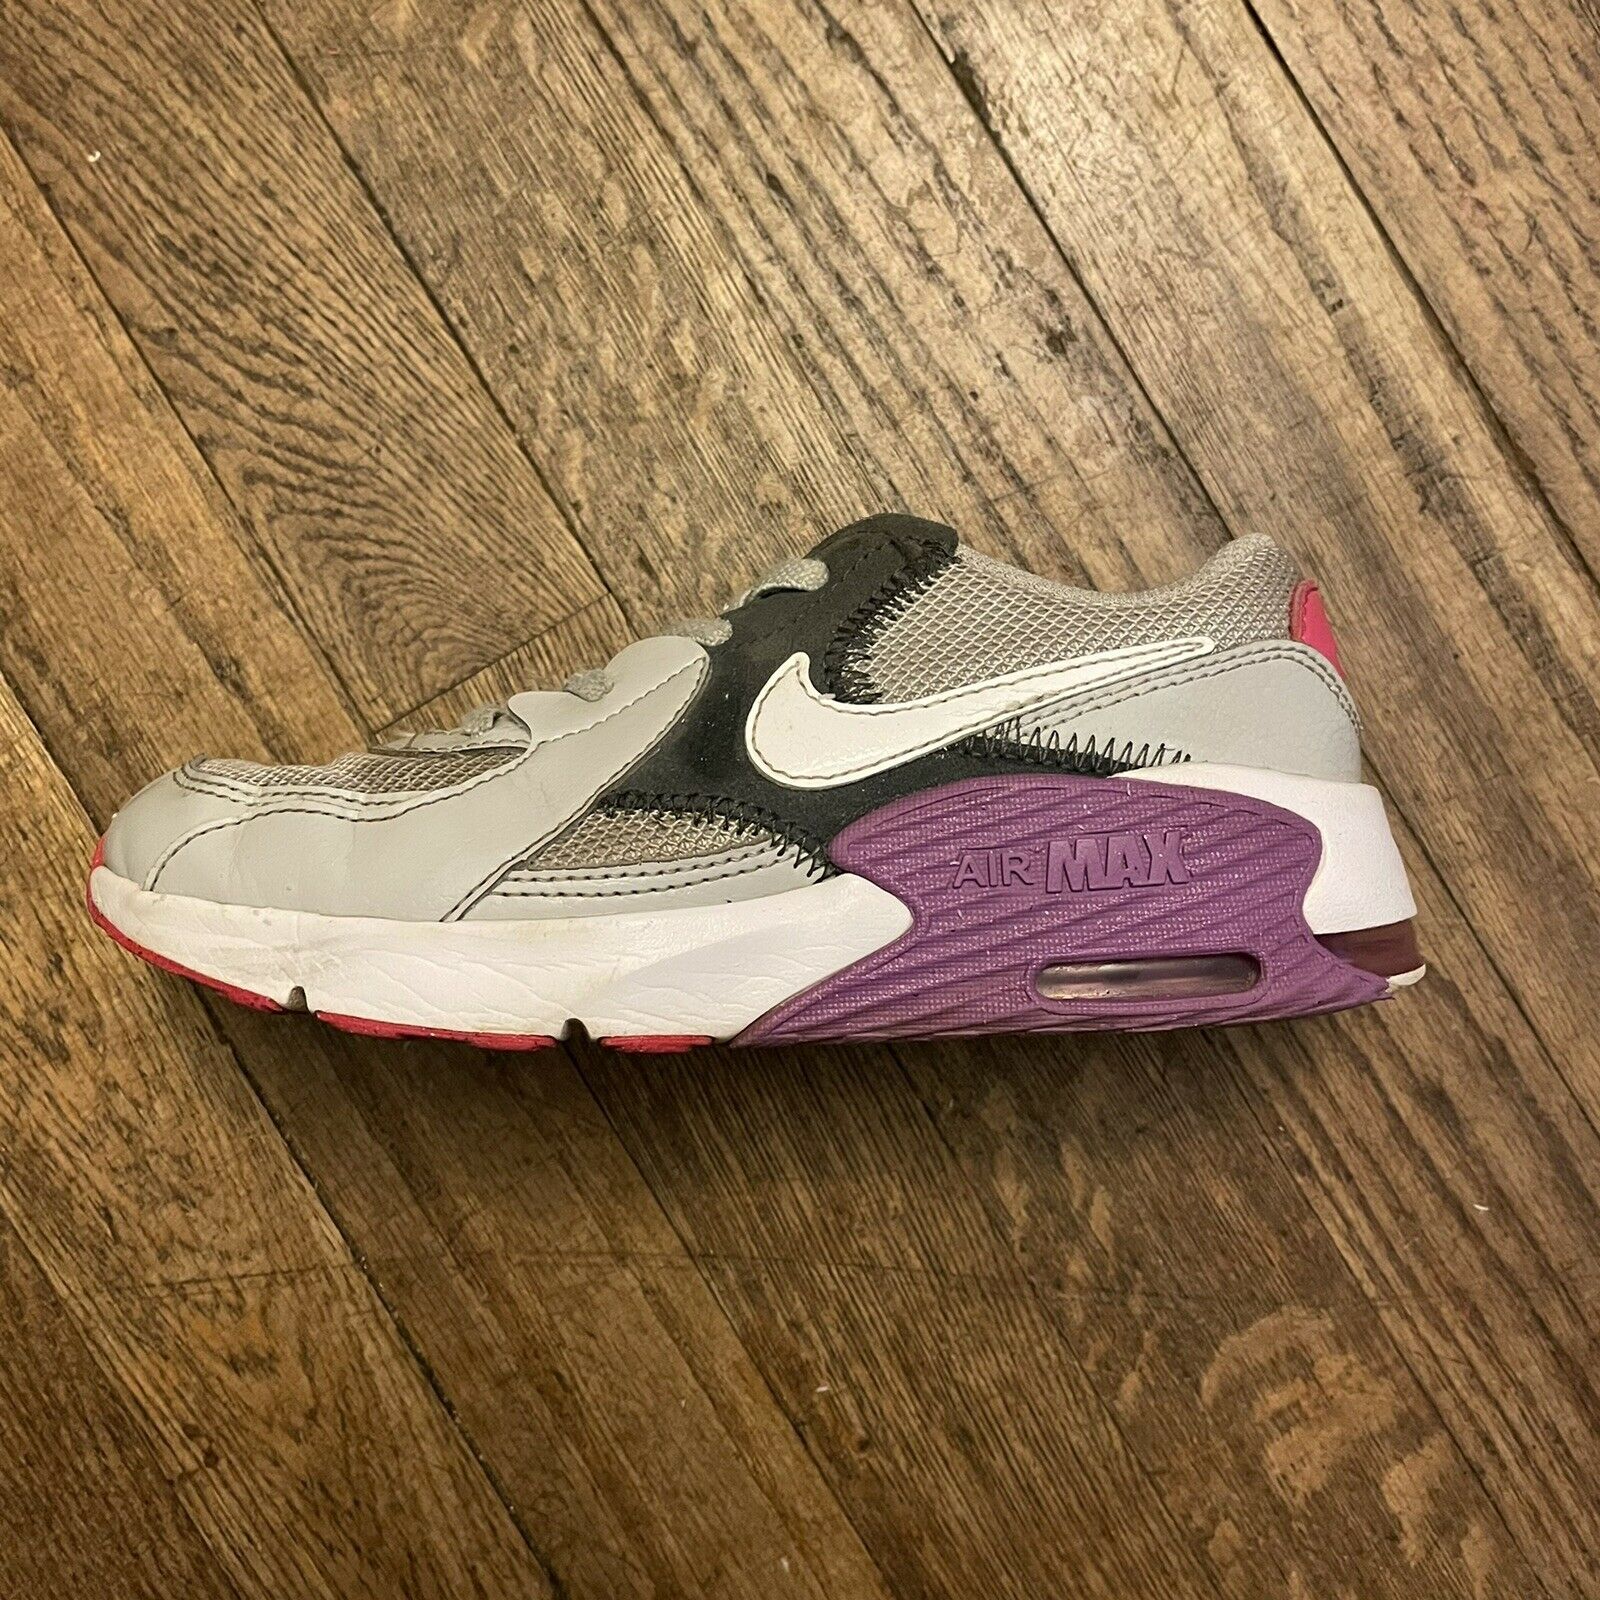 Nike Air Max Girls Youth Size 2.5Y Gray W/Purple Pink Accents Shoes CD6892-003